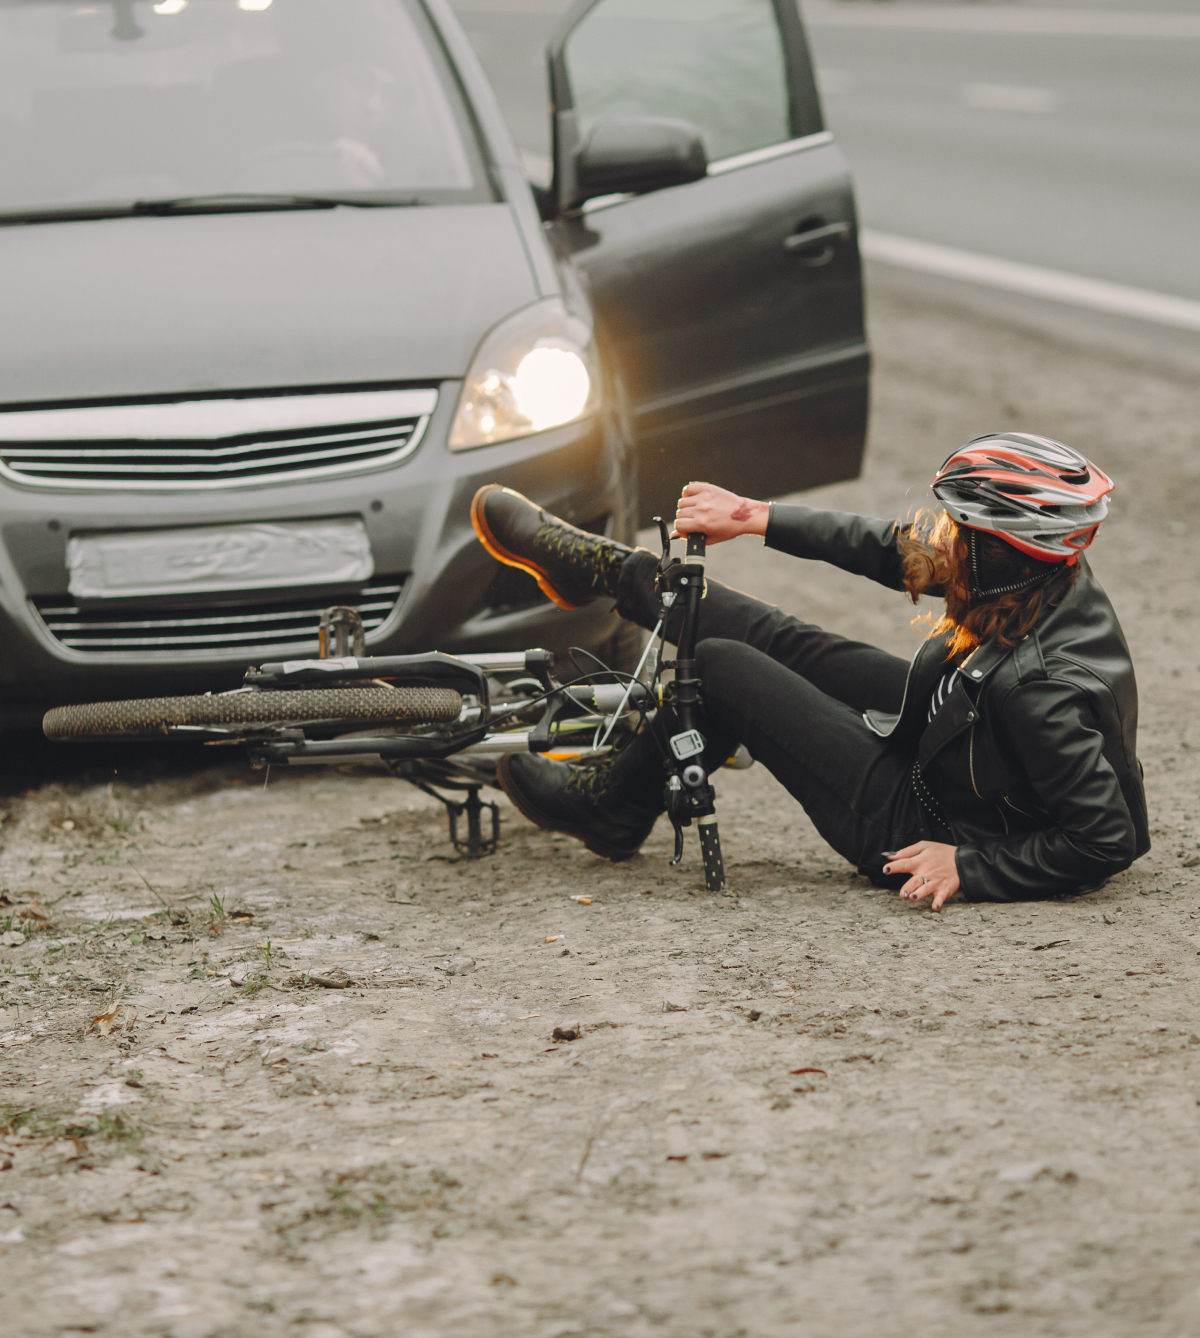 Bicycle Accident Lawyer in Nevada